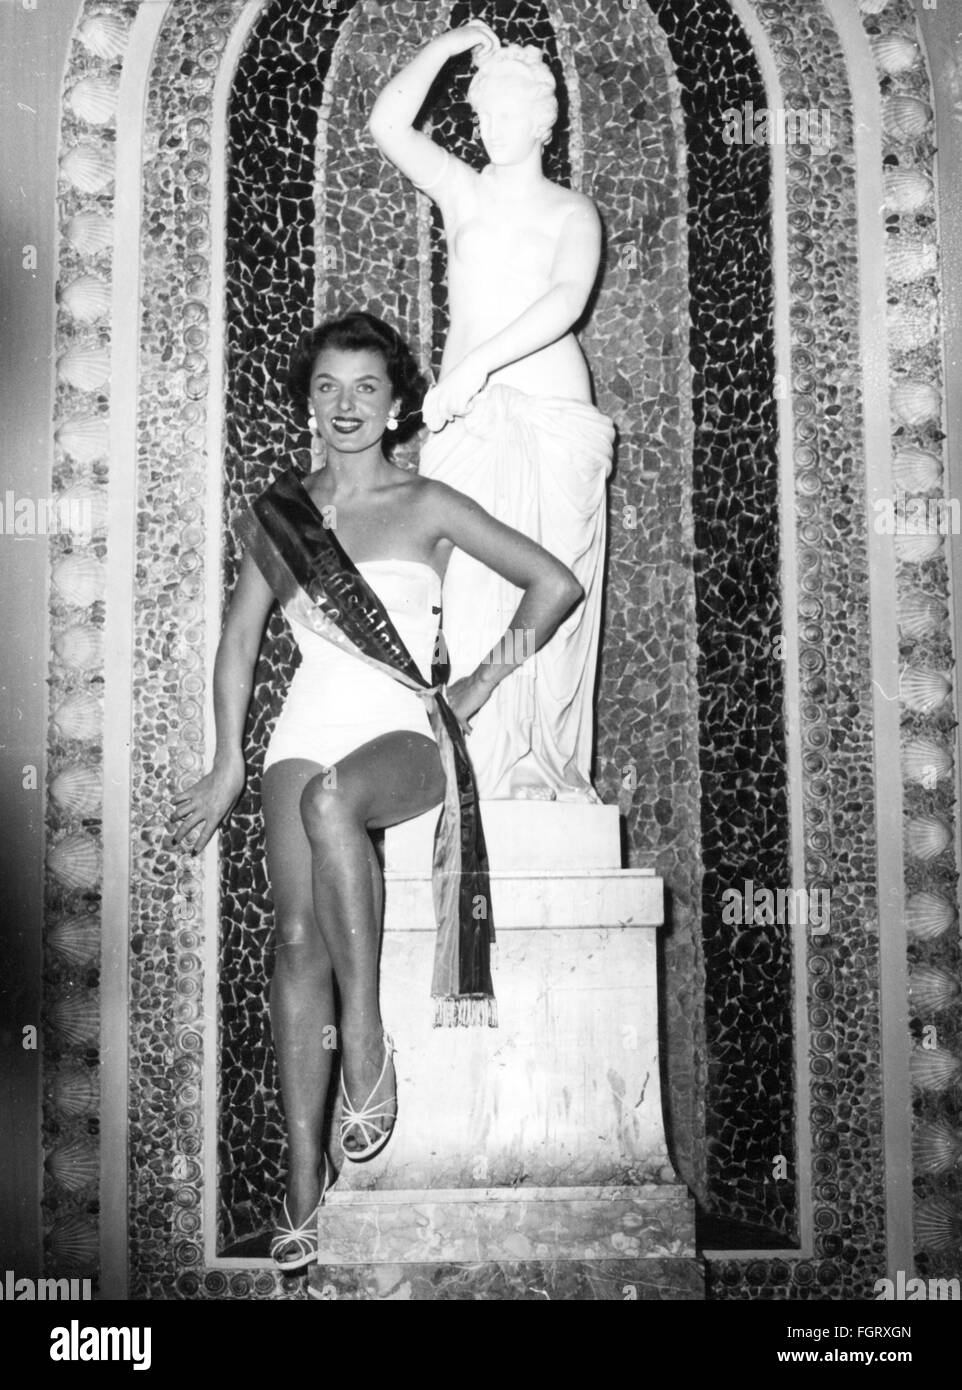 people,women,beauty pageants,Miss Germany 1953,winner Christel Schaack,full length,in front of an Aphrodite statue,kurhaus,Wiesbaden,16.6.1953,20th century,1950s,50s,Germany,beauty contest,beauty contests,beauty queen,beauty queens,beauty,beauties,belle,belles,swimsuit,bathing suit,swimming costume,swimsuits,bathing suits,standing,smiles,smiling,smile,sash,sashes,fine arts,art,sculpturing,statue,statues,sculpture,sculptures,goddesses,goddess of love,love goddess,love,Venus,Miss Berlin,beauty pageants,beauty pageant,Additional-Rights-Clearences-Not Available Stock Photo